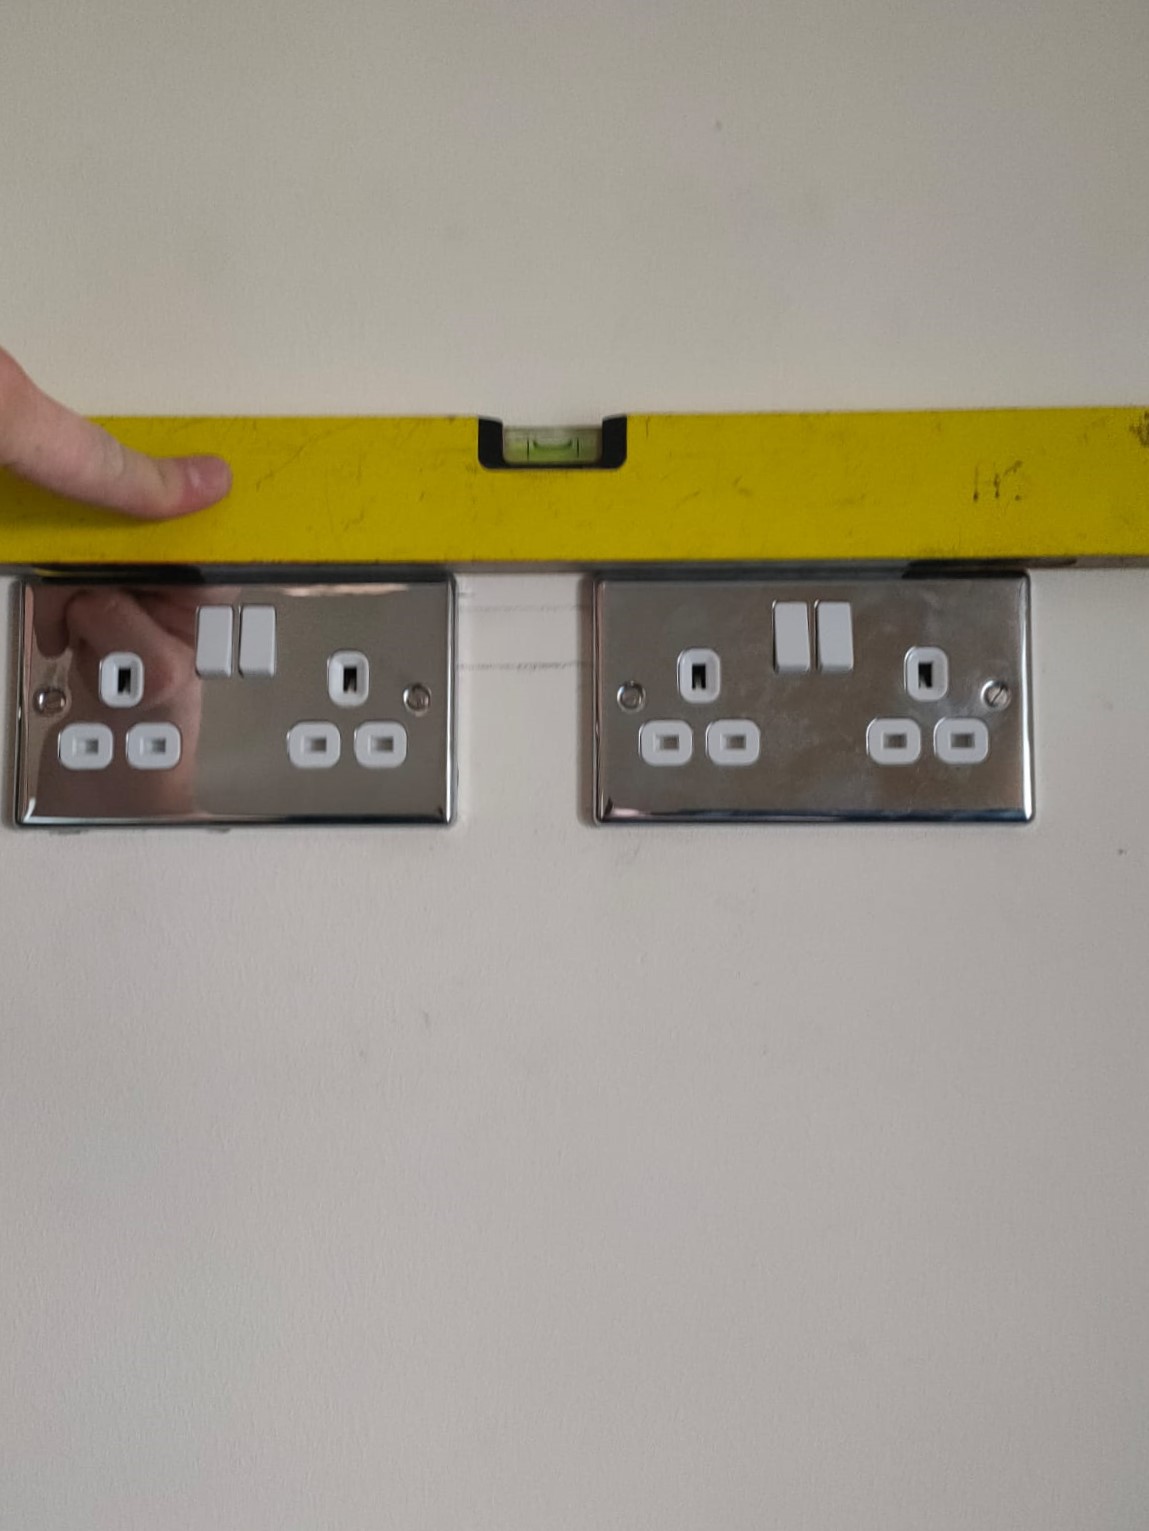 Two sockets on a wall, with one of those straight checker devices, they are aligned perfectly